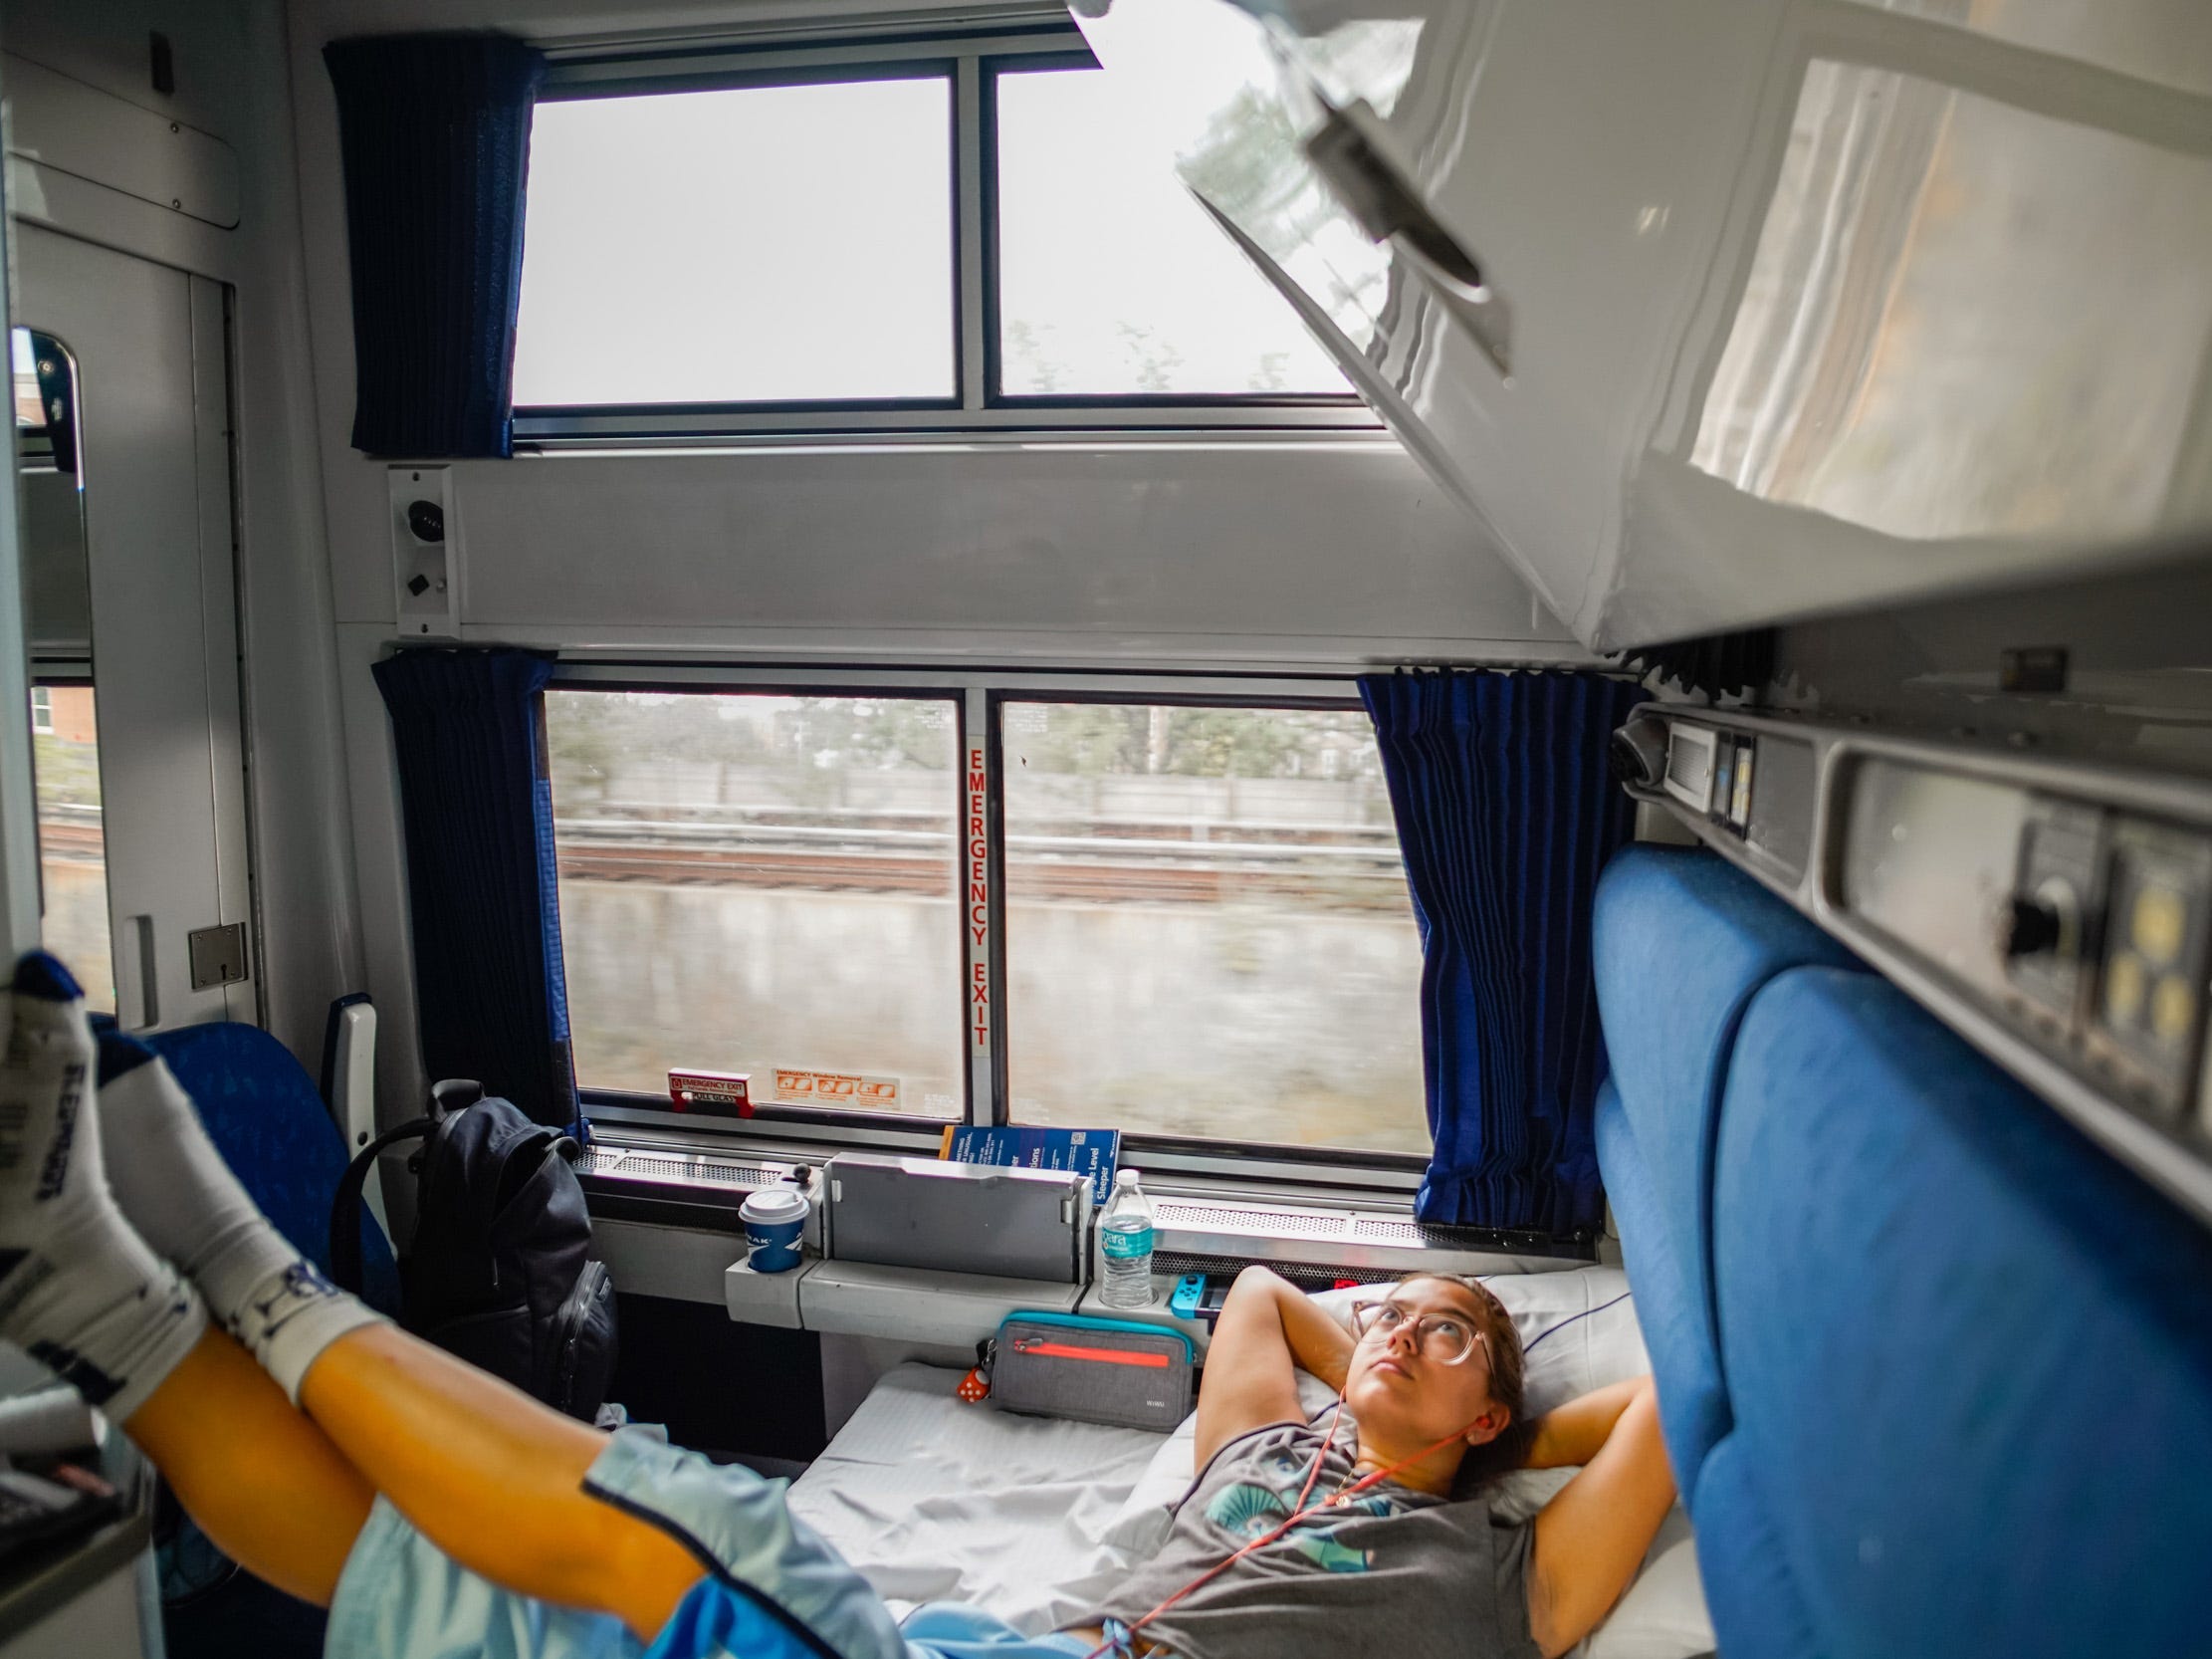 <p>My Amtrak bedroom had a sofa that folded out into a bed, a bunk that pulled down from the ceiling, and a chair that folded up out of the way.</p><p>Two wide windows and a full-length mirror on the wall made the space feel bigger. And even with all the furniture and amenities, there was enough floor space to stand up and stretch my limbs between hours of sitting. </p>